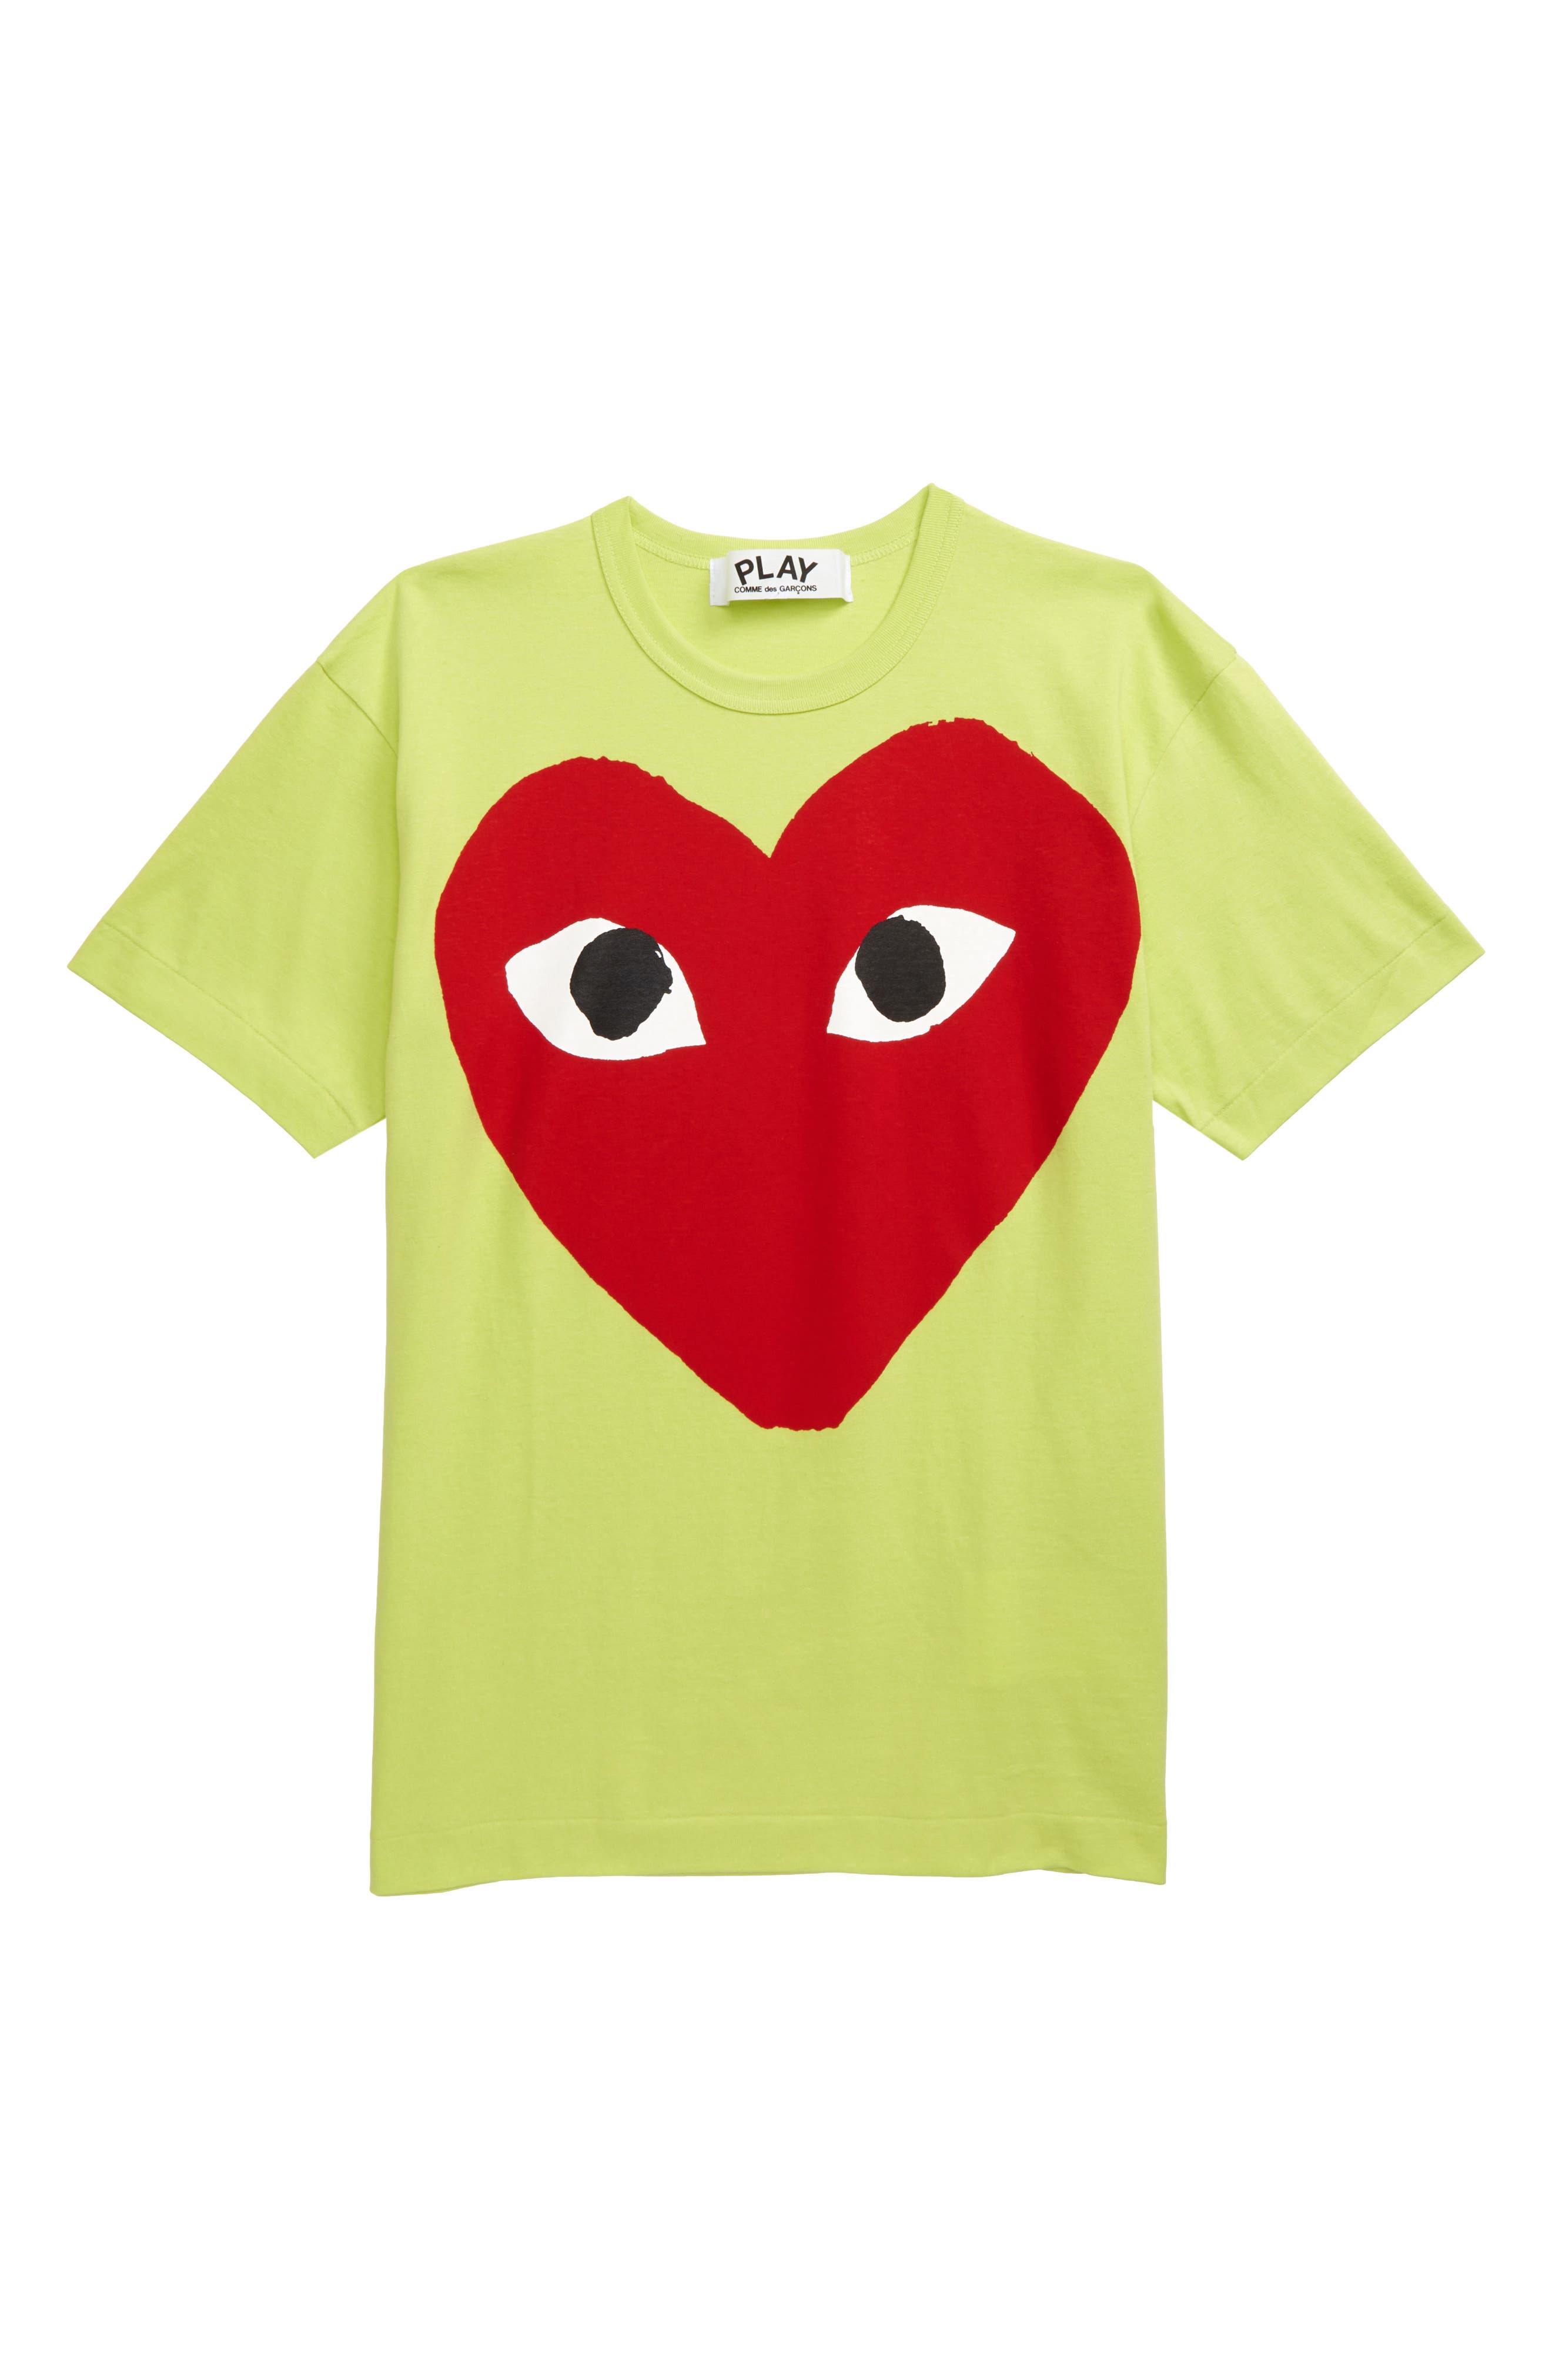 red and green graphic tee